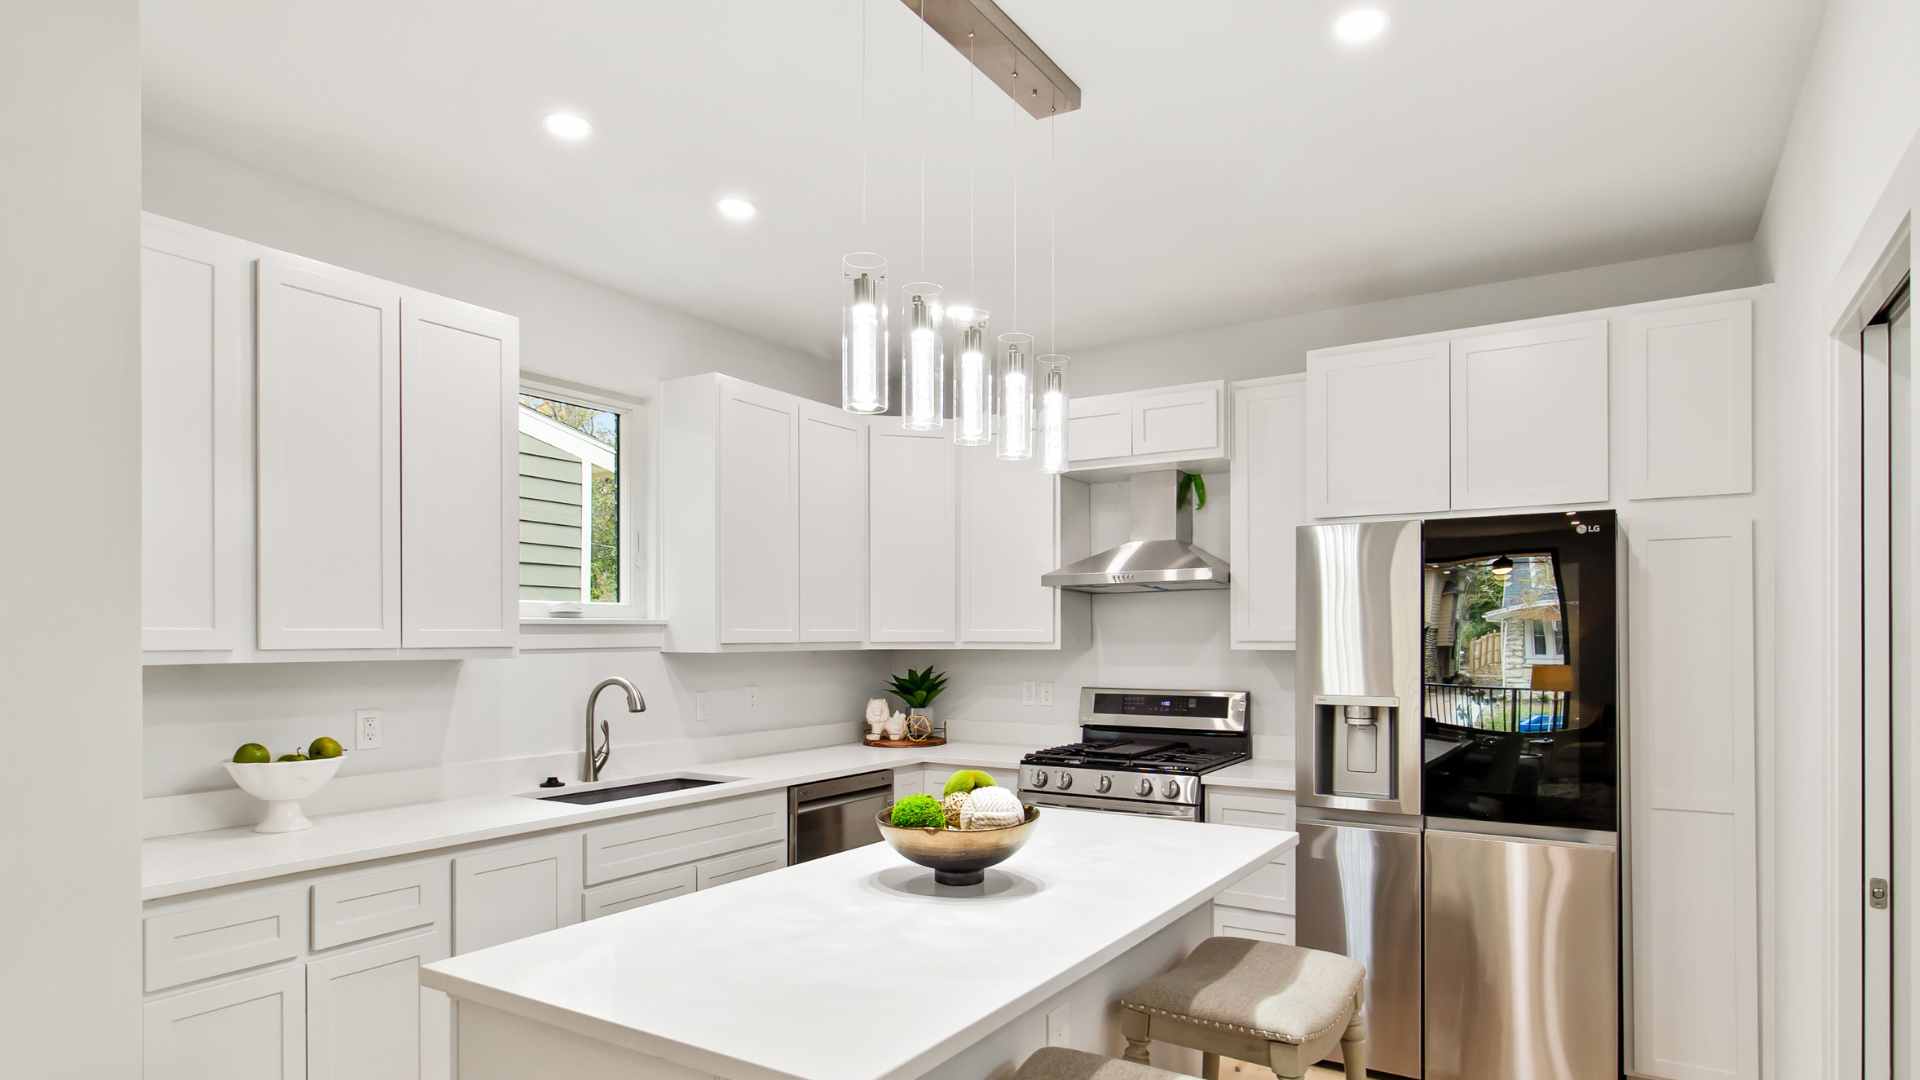 Photo of a modern kitchen in a newly built home with white cabinets and modern light fixtures.